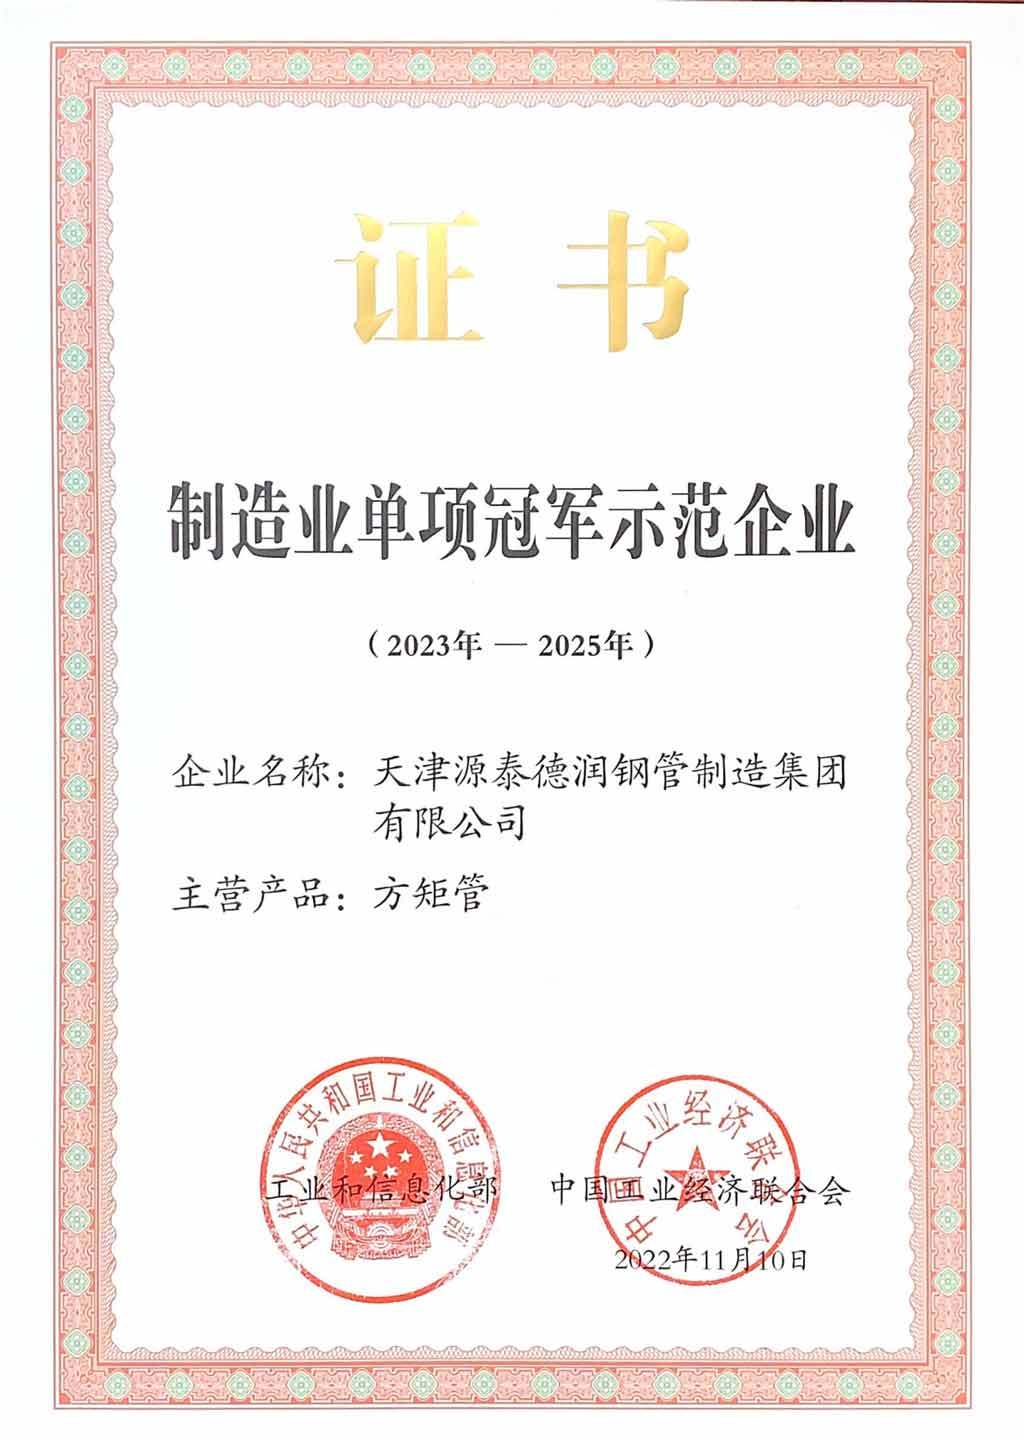 Tianjin Yuantai Derun Group has been awarded the National Manufacturing Single Champion Demonstration Enterprise by virtue of its borrower square rectangular tube.